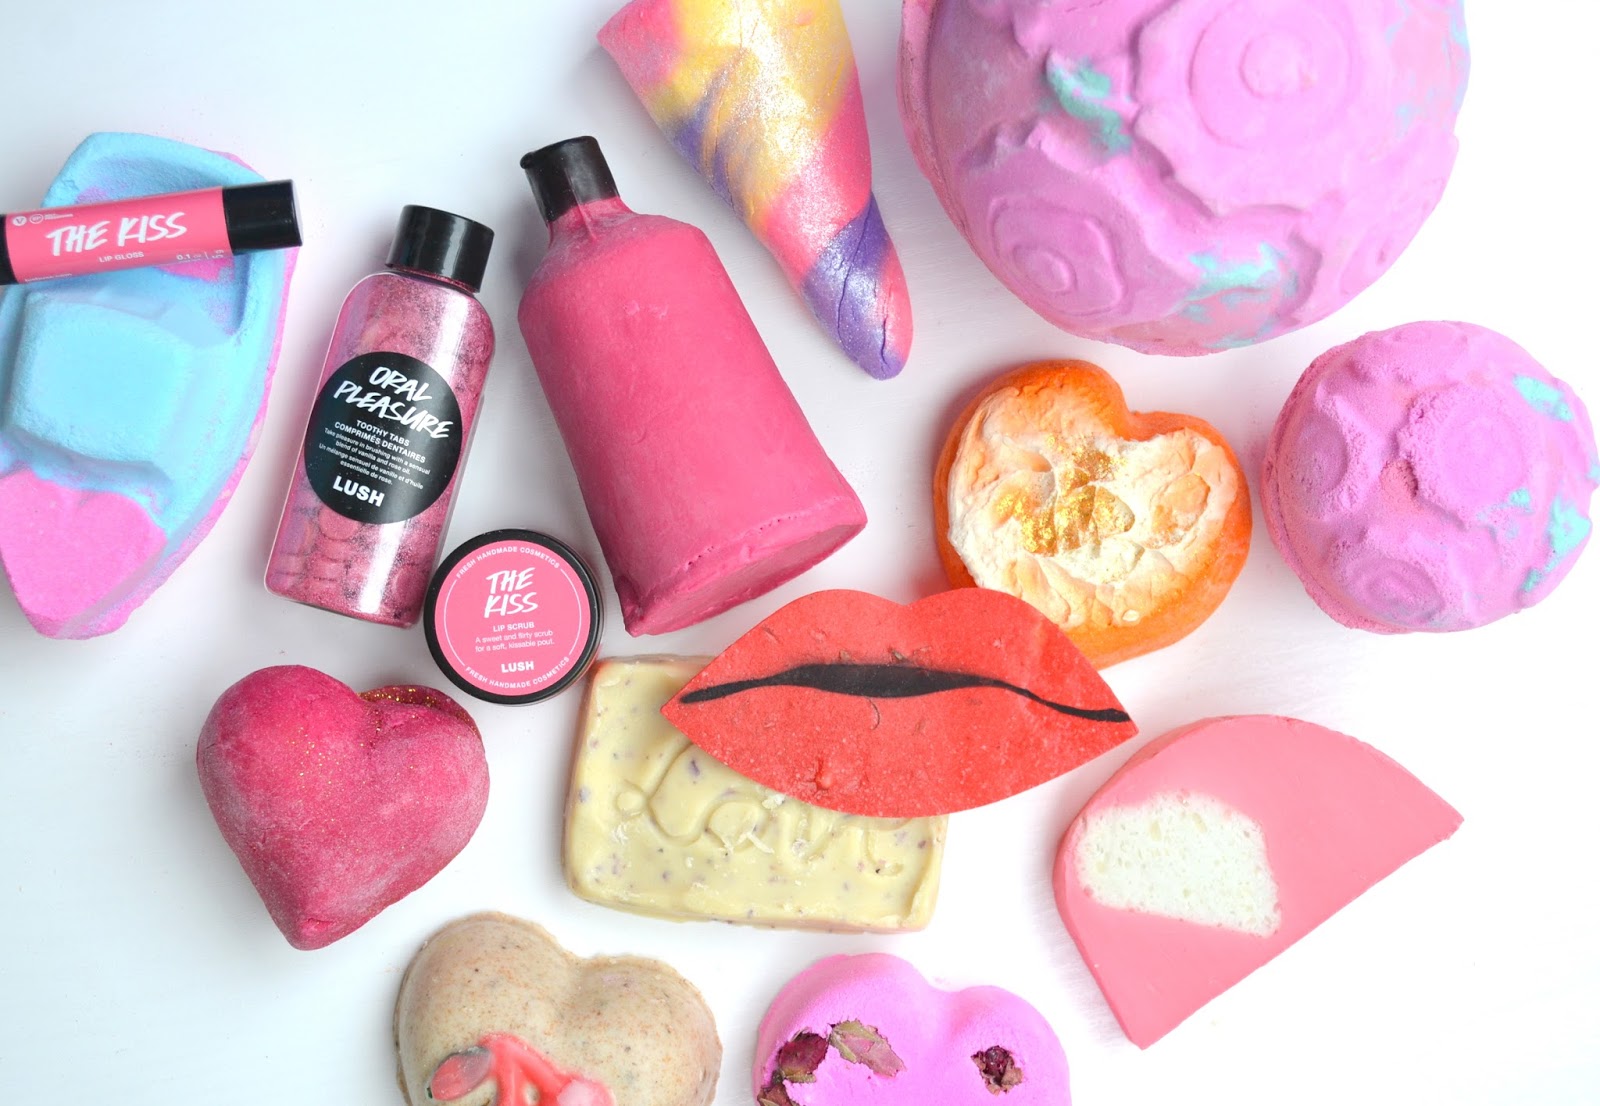 BATH & BODY The Lush Valentine's Day Collection Cosmetic Proof